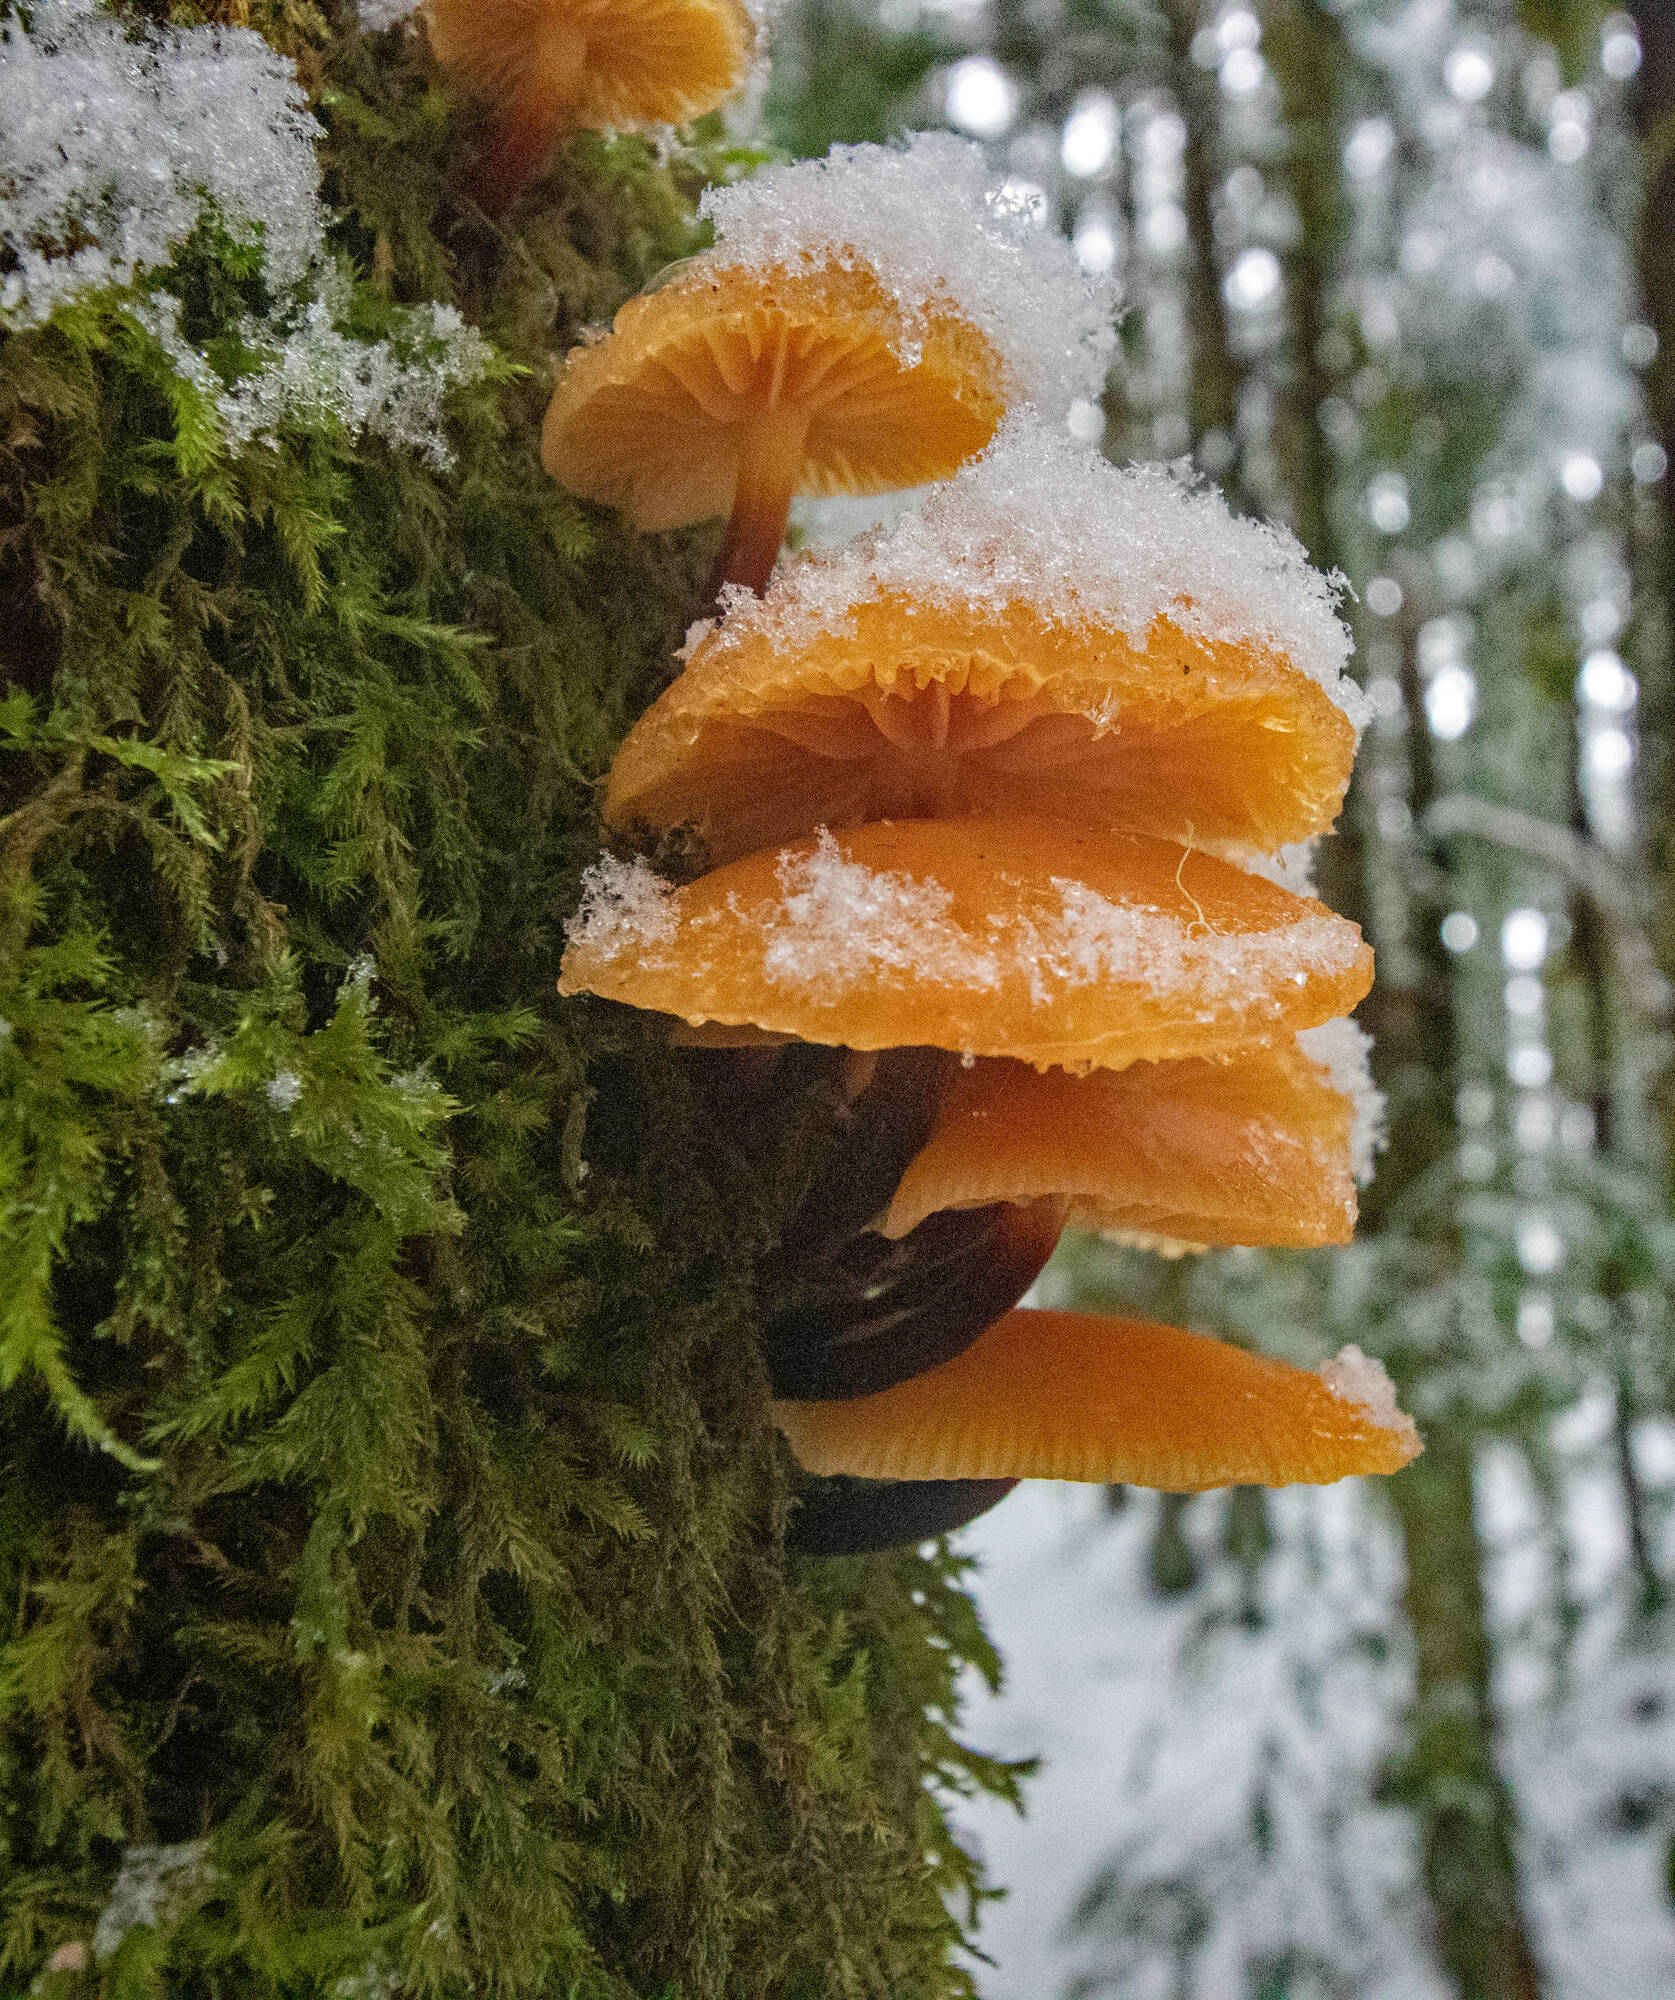 This bright orange fungus grows on dead cottonwoods and produces spores in winter. (Courtesy Photo / Jos Bakker)